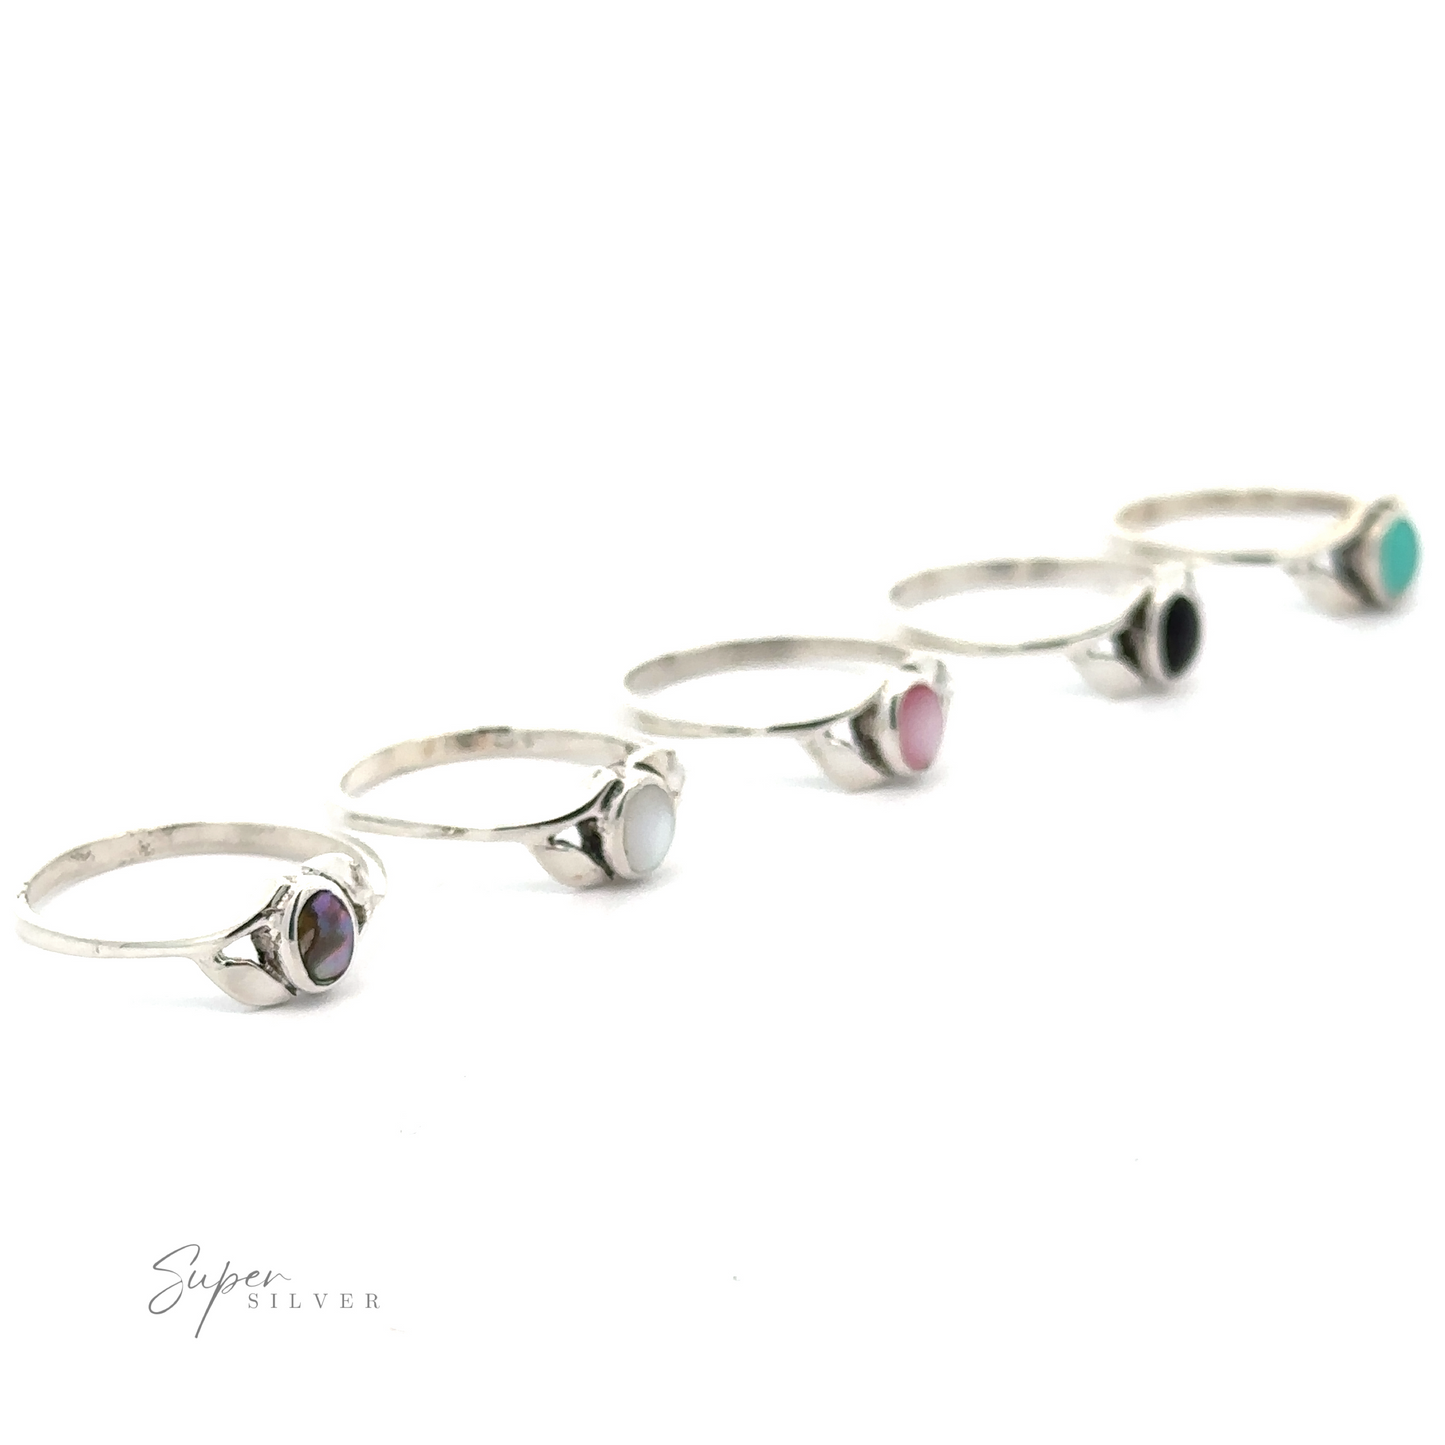 A collection of five Dainty Oval Stone Rings with Leaf Accents in various colors, including mother of pearl, arranged in a diagonal line on a white background.